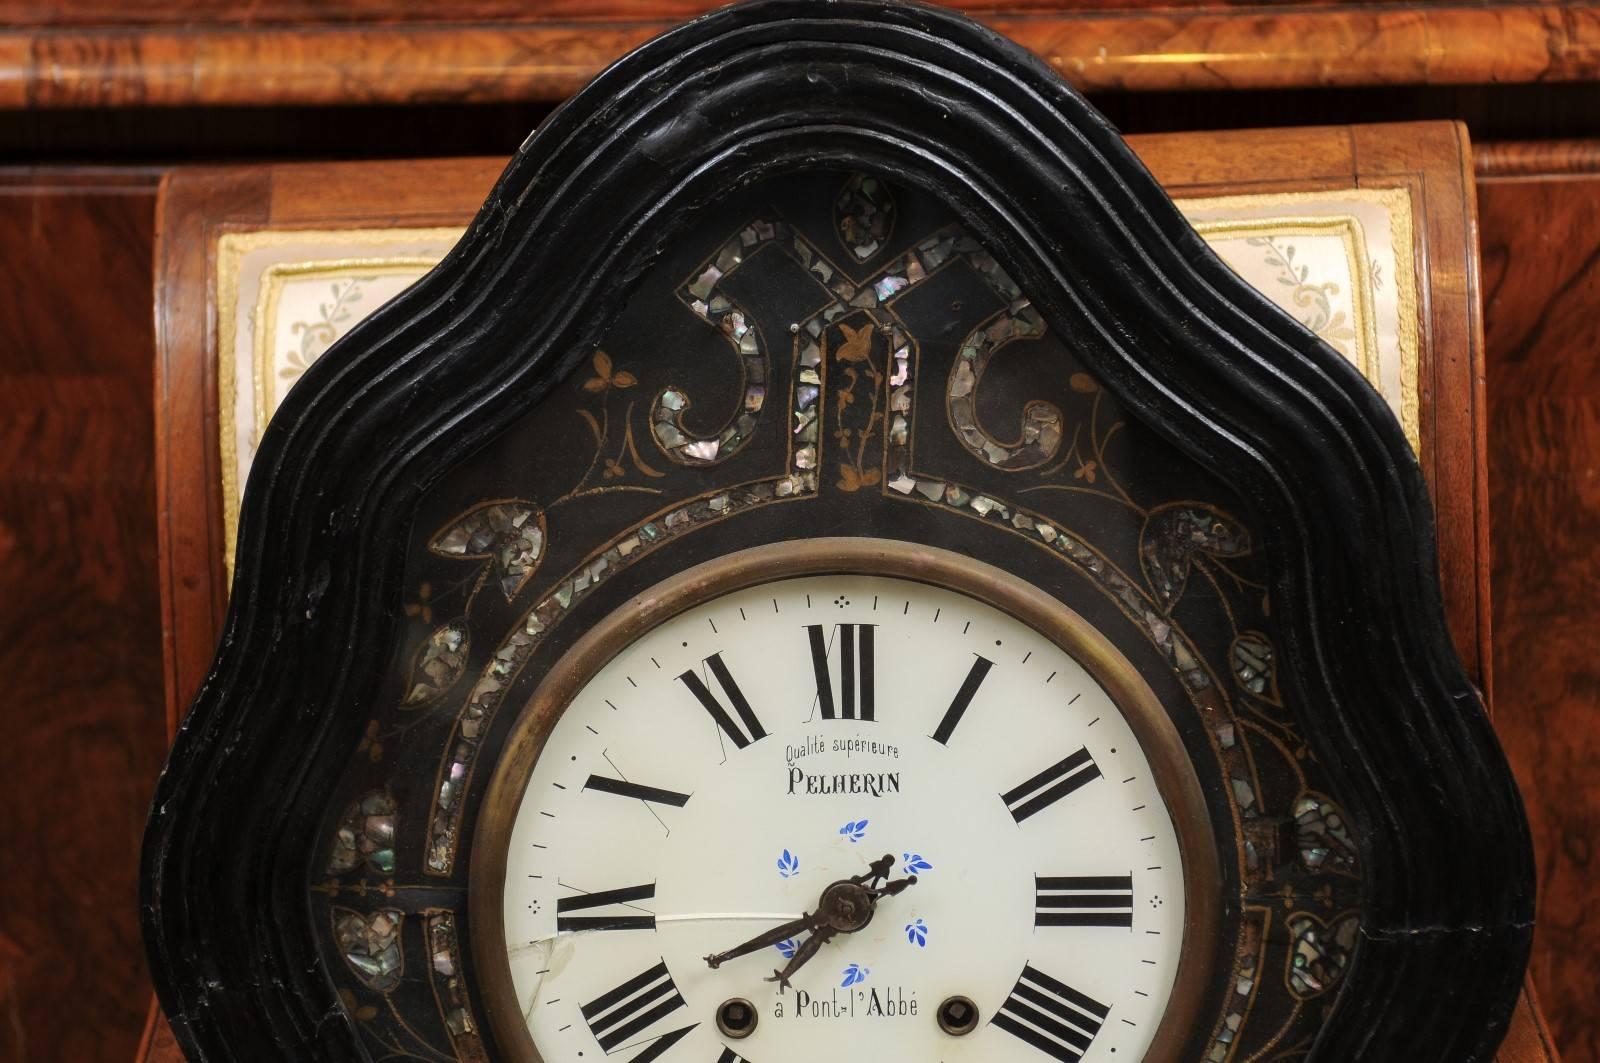 Metal 19th Century, French, Ebonized Wall Clock with Inlay & White Enameled Face